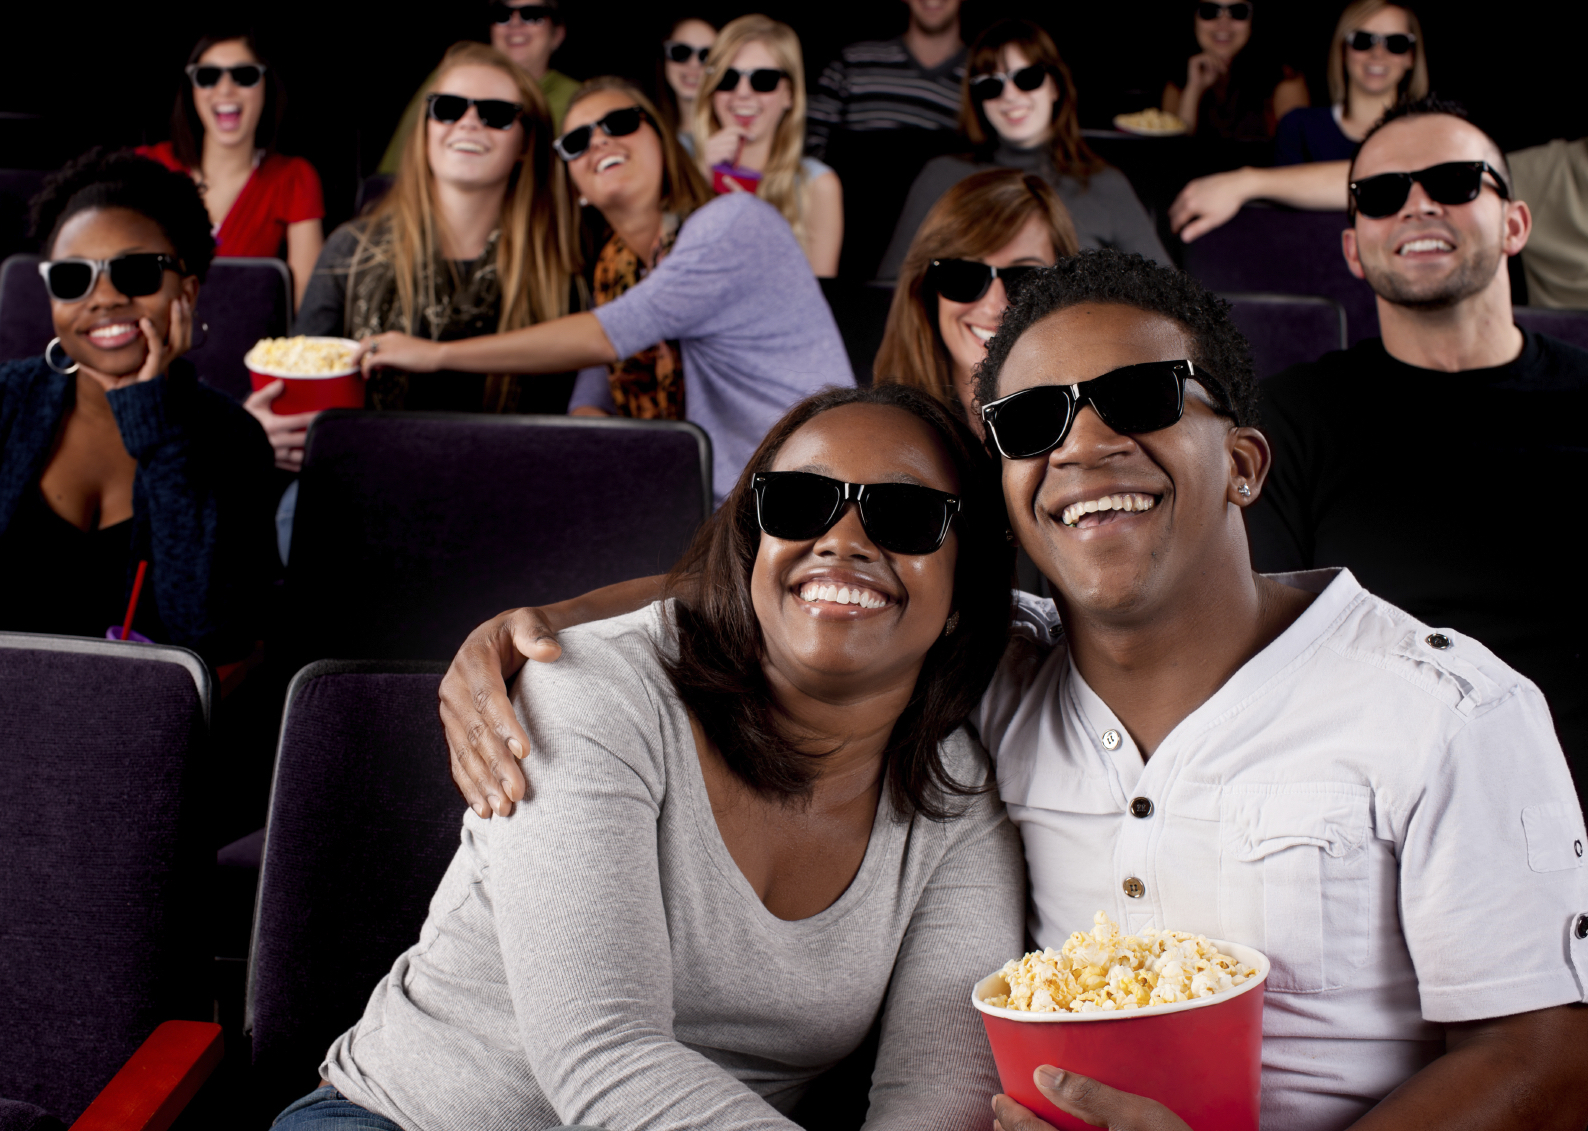 Movie Marathon Quiz Real People Audience: Group Black Couple Watching Movie Theater 3D